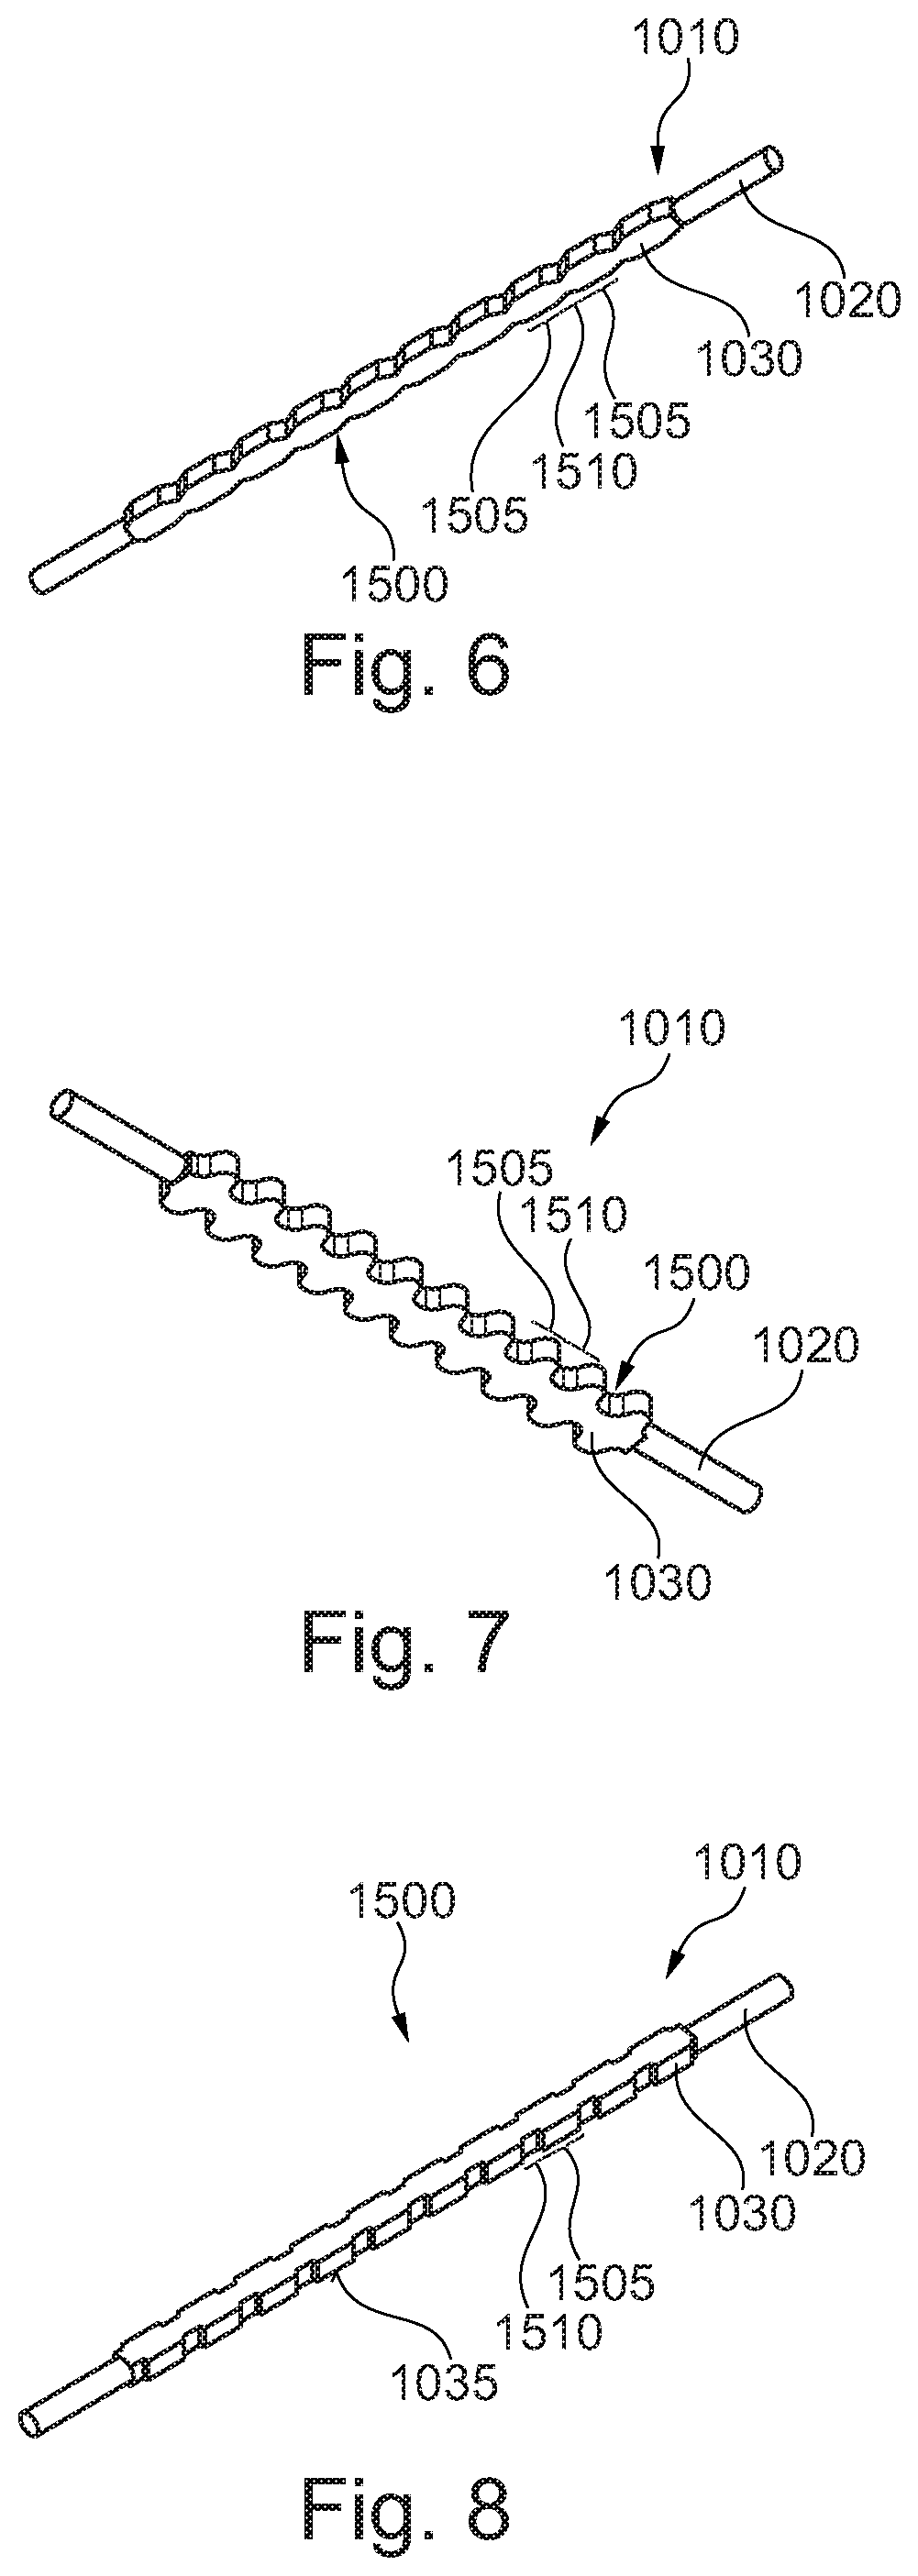 Wiring harness, vehicle component, mold, mold system and method for manufacturing the wiring harness